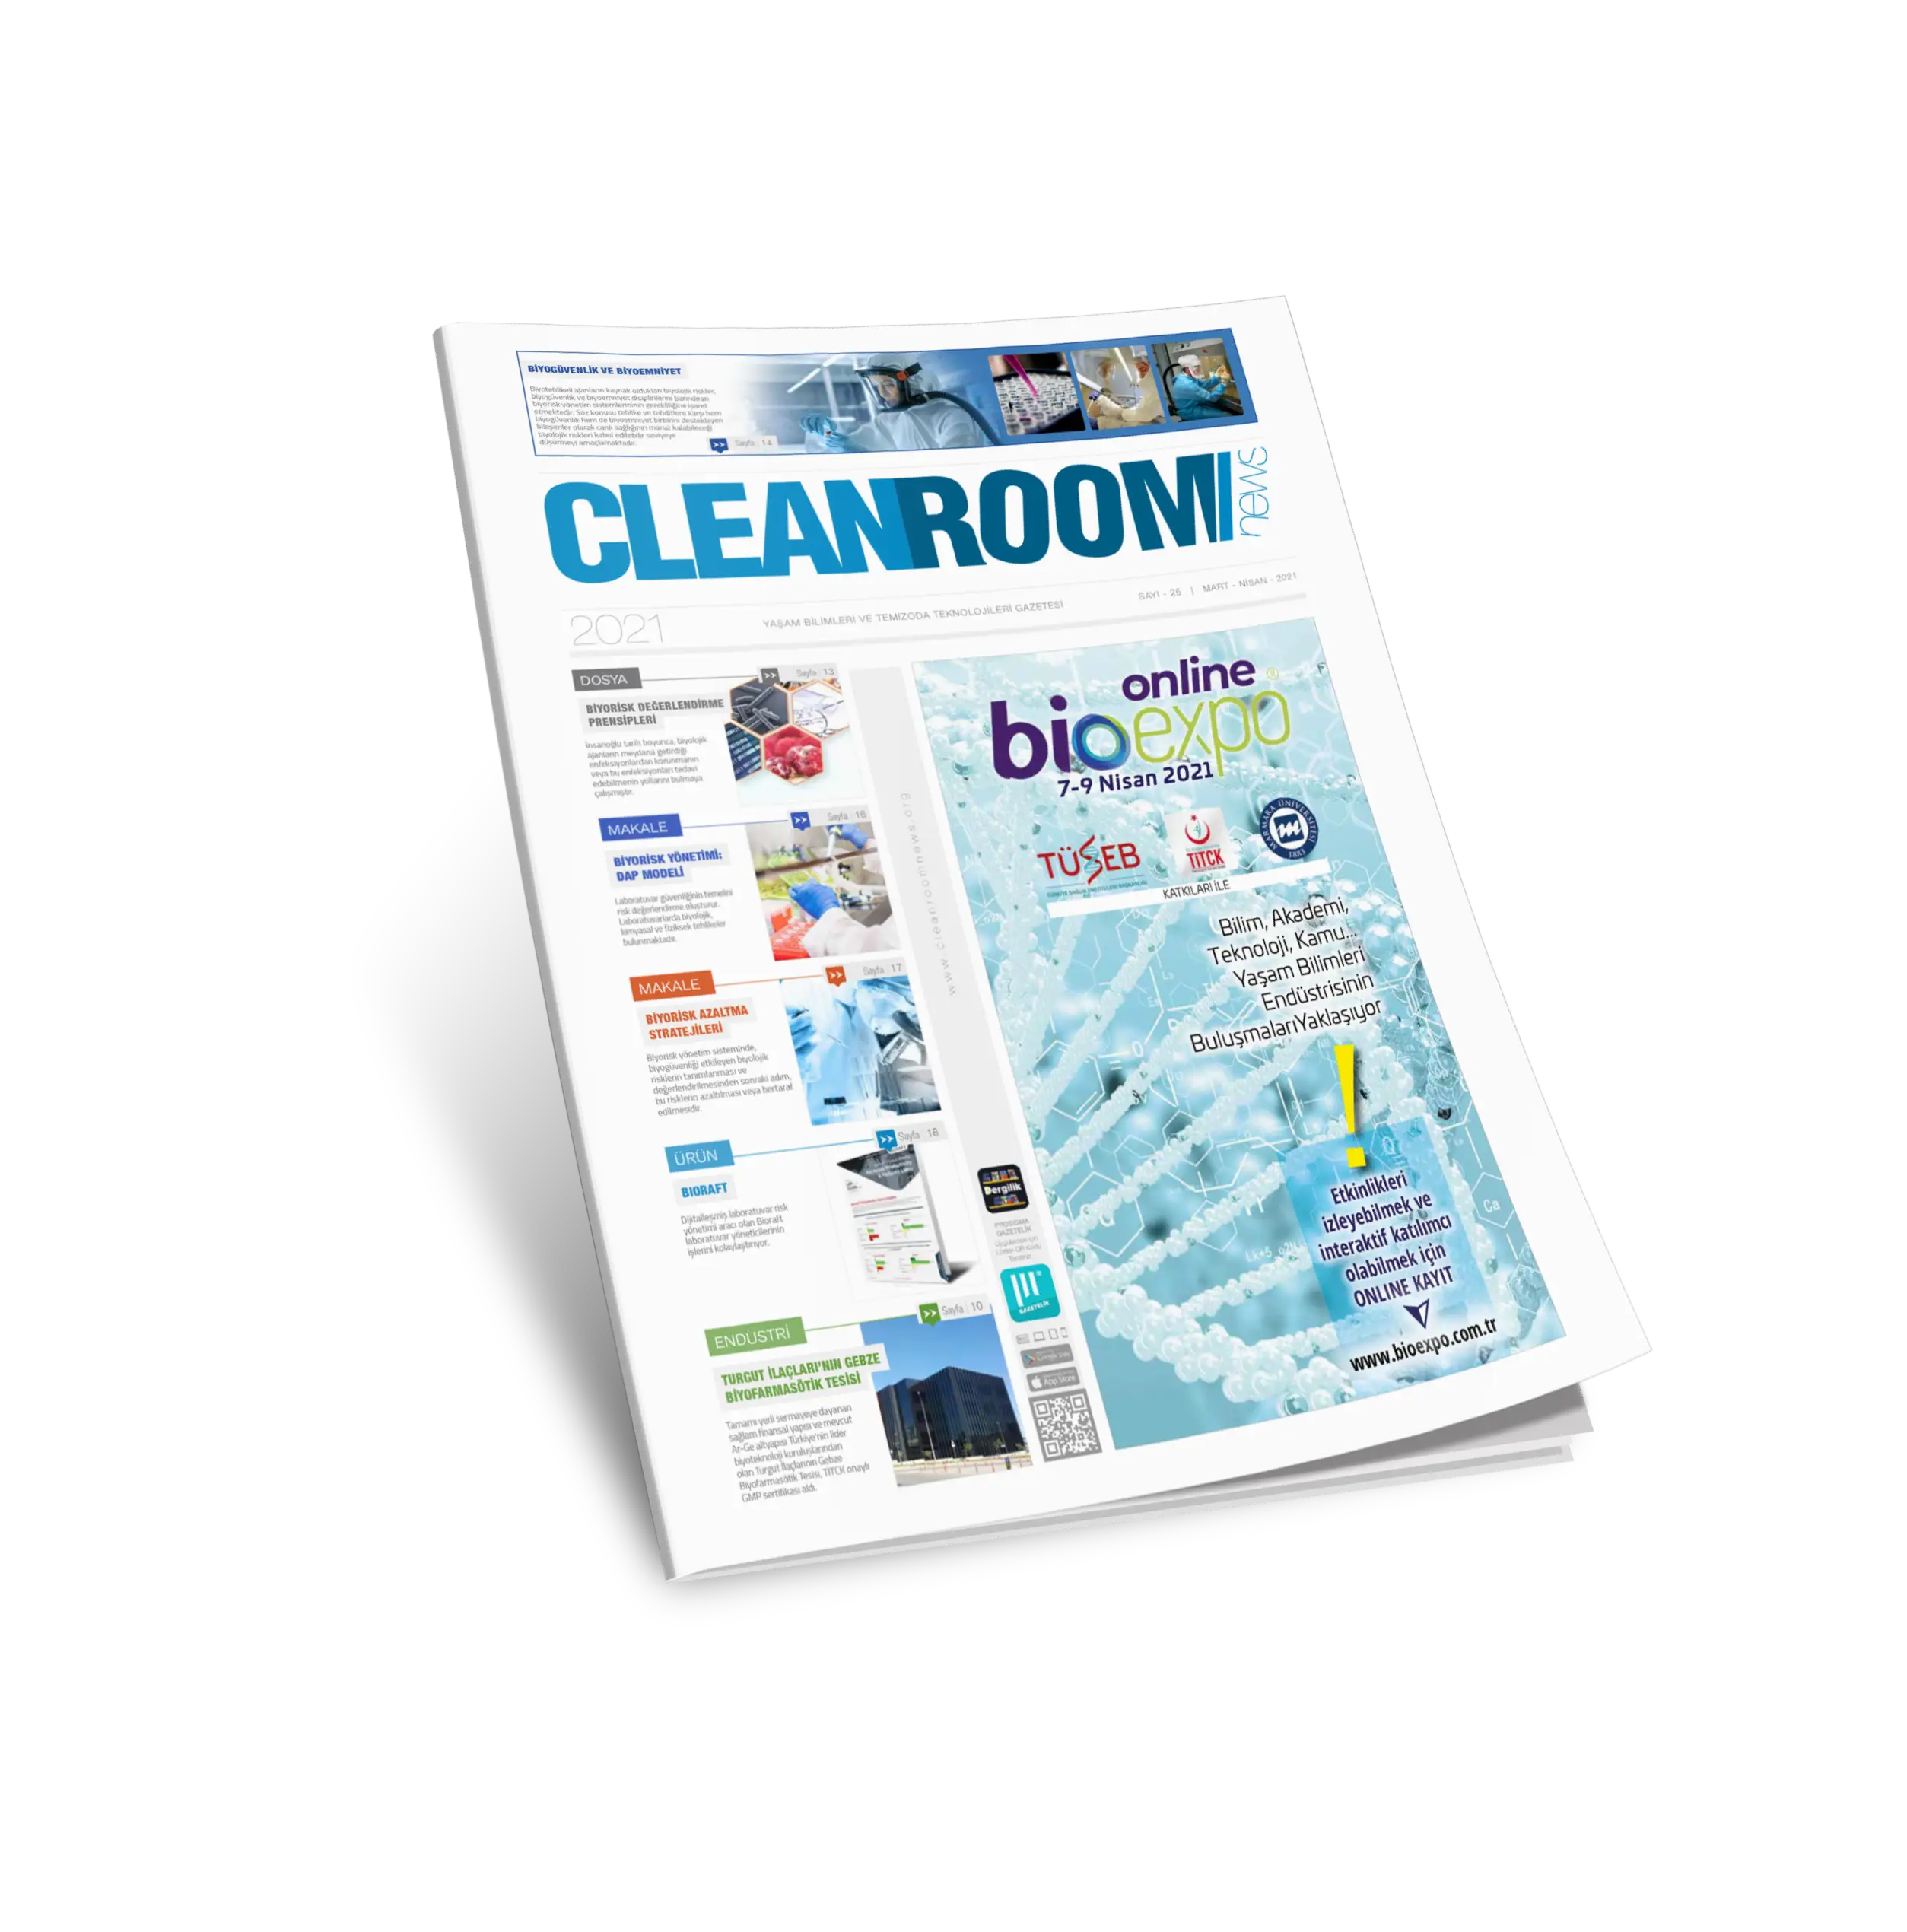 CLEANROOMNEWS